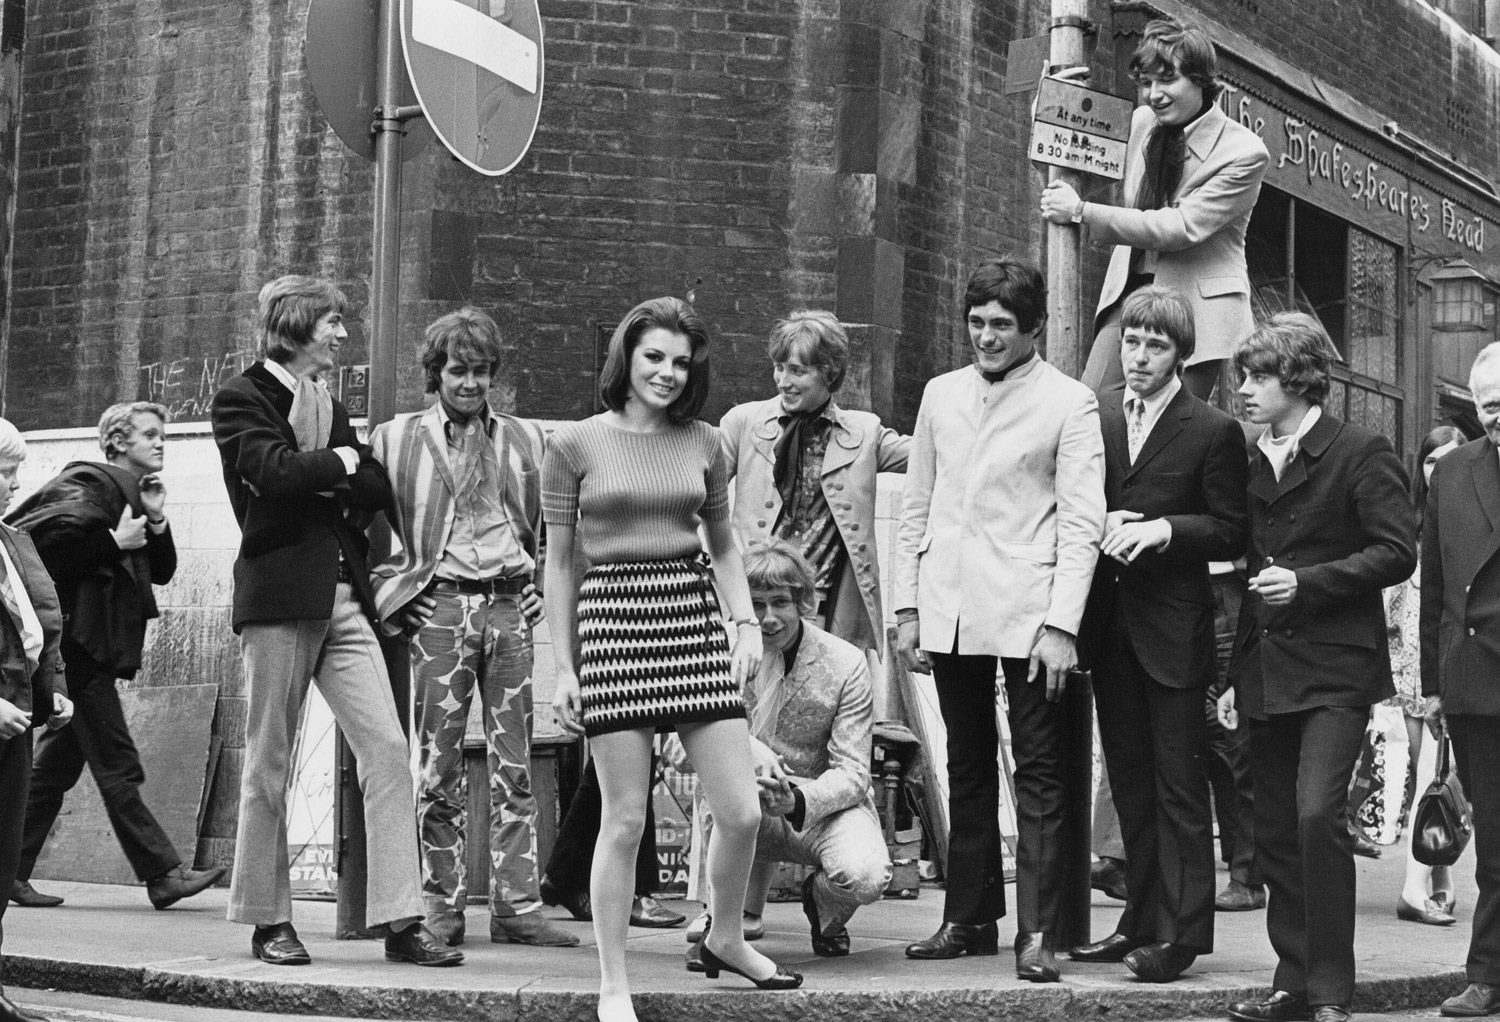 Some cool looking dudes and hippy chicks in Carnaby street circa 1967.